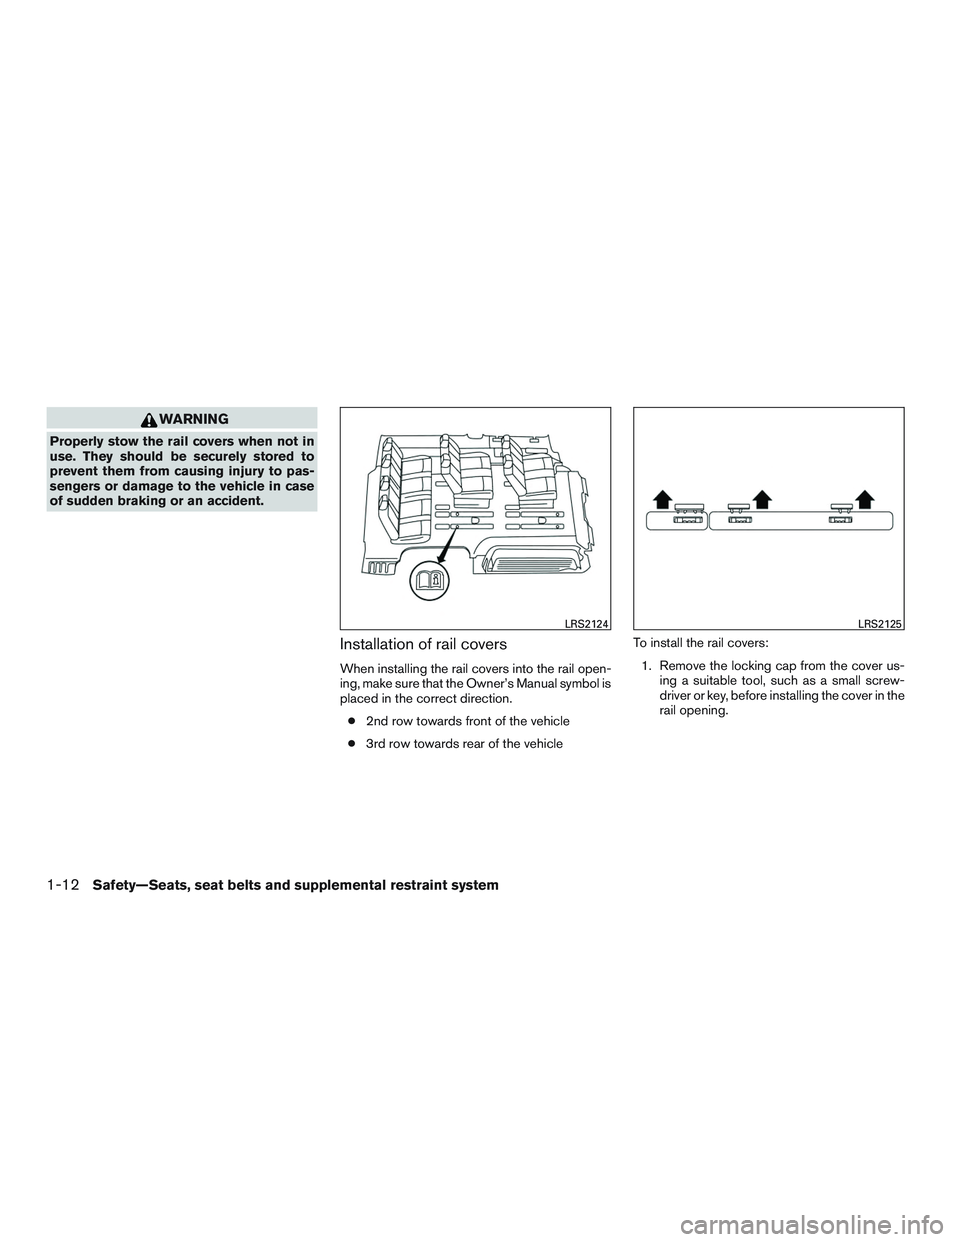 NISSAN NV PASSENGER VAN 2016  Owners Manual WARNING
Properly stow the rail covers when not in
use. They should be securely stored to
prevent them from causing injury to pas-
sengers or damage to the vehicle in case
of sudden braking or an accid